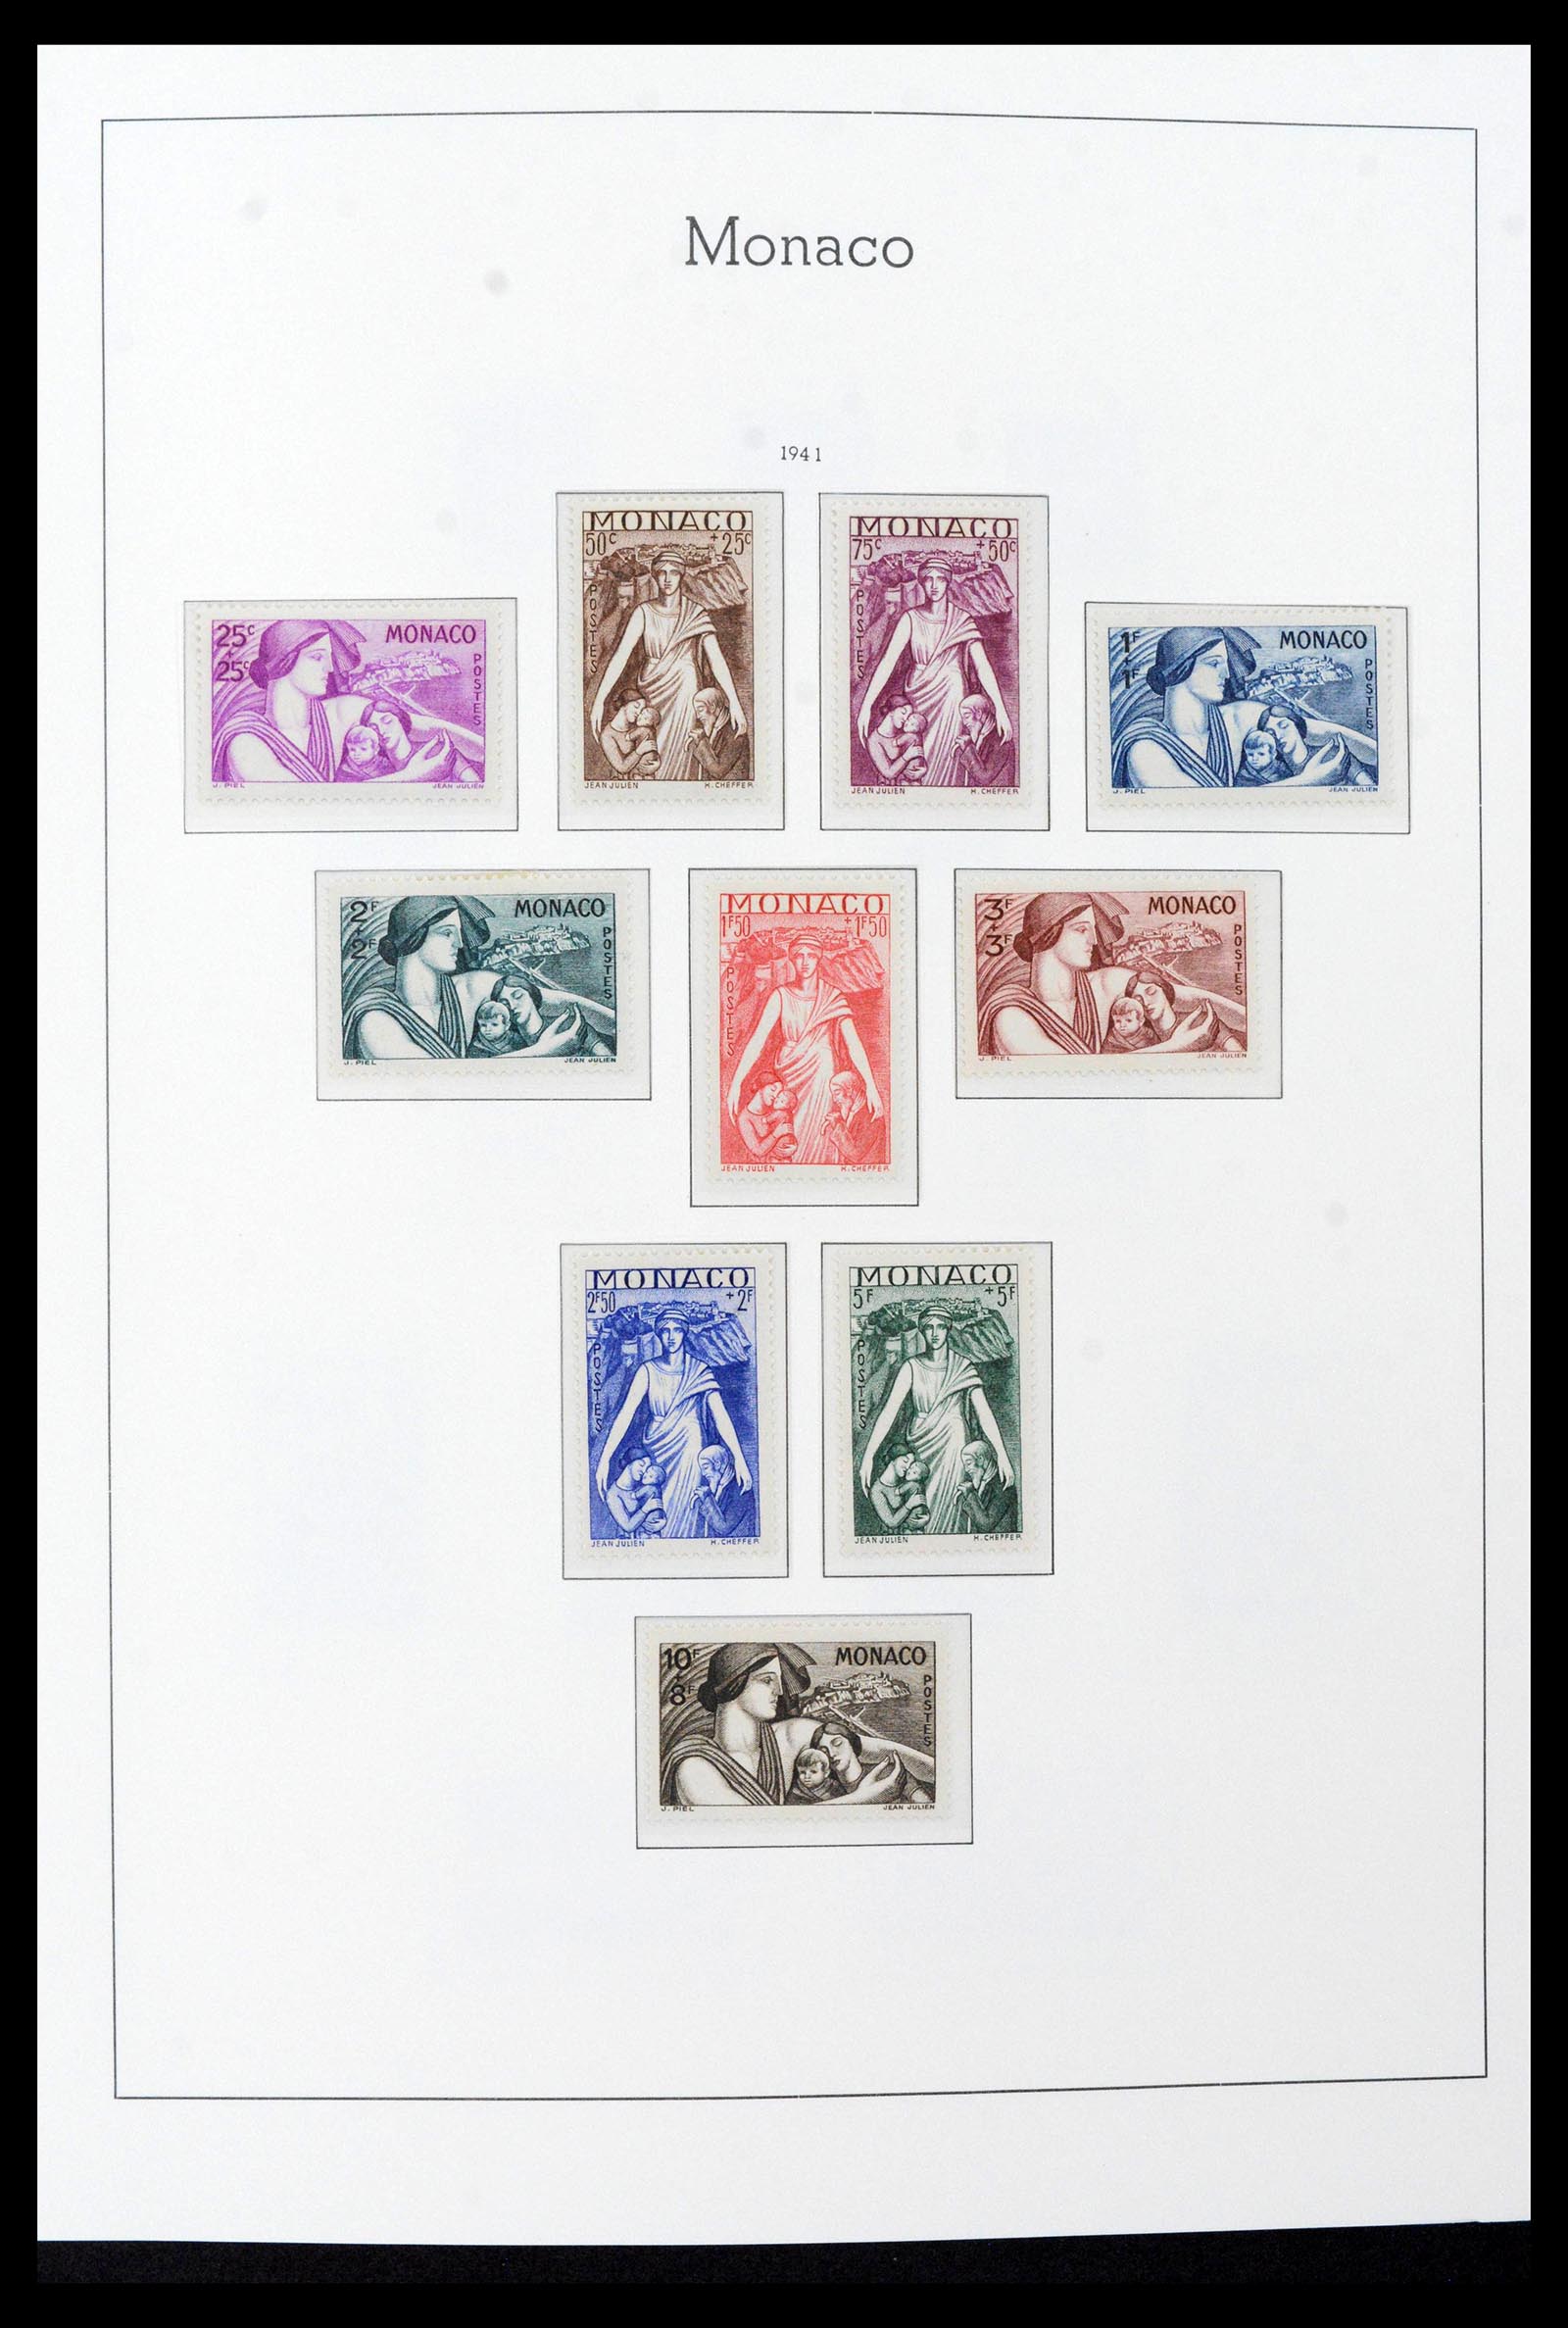 39390 0022 - Stamp collection 39390 Monaco complete 1885-1990.